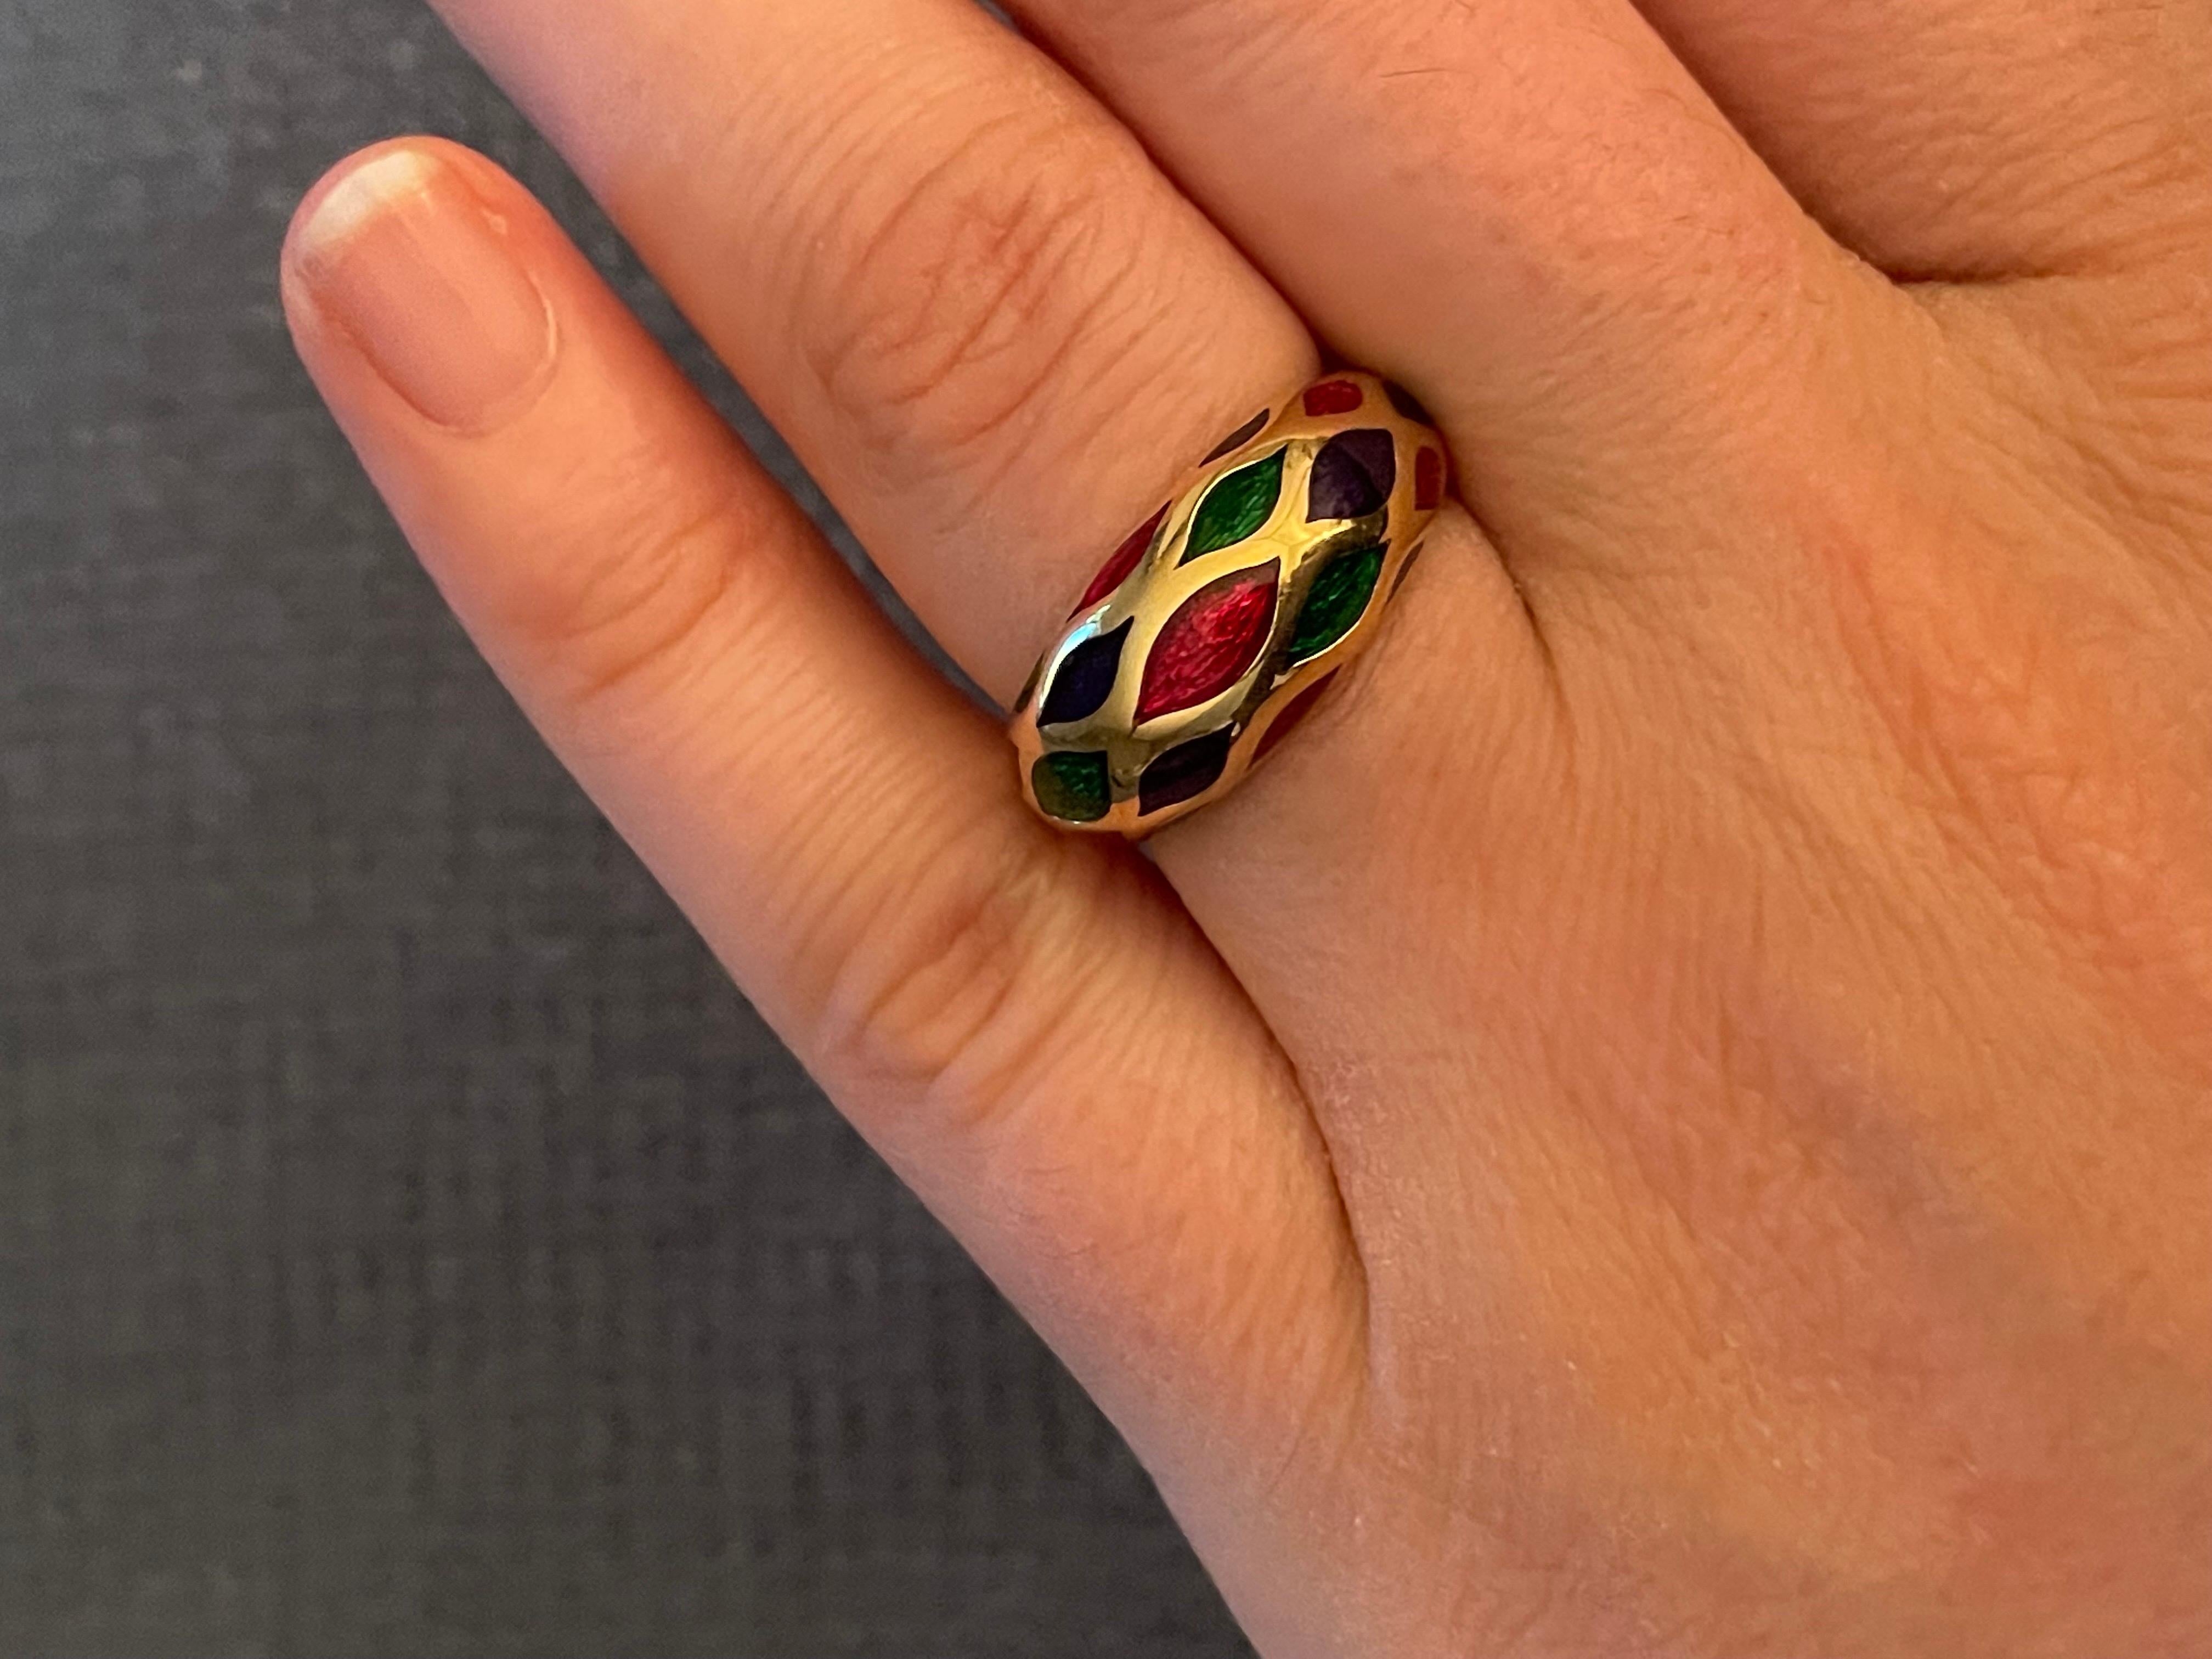 18 Karat yellow gold dome ring featuring three different enamel colors: Red, Green, Blue weighing 6.4 grams.
Great for staking!  